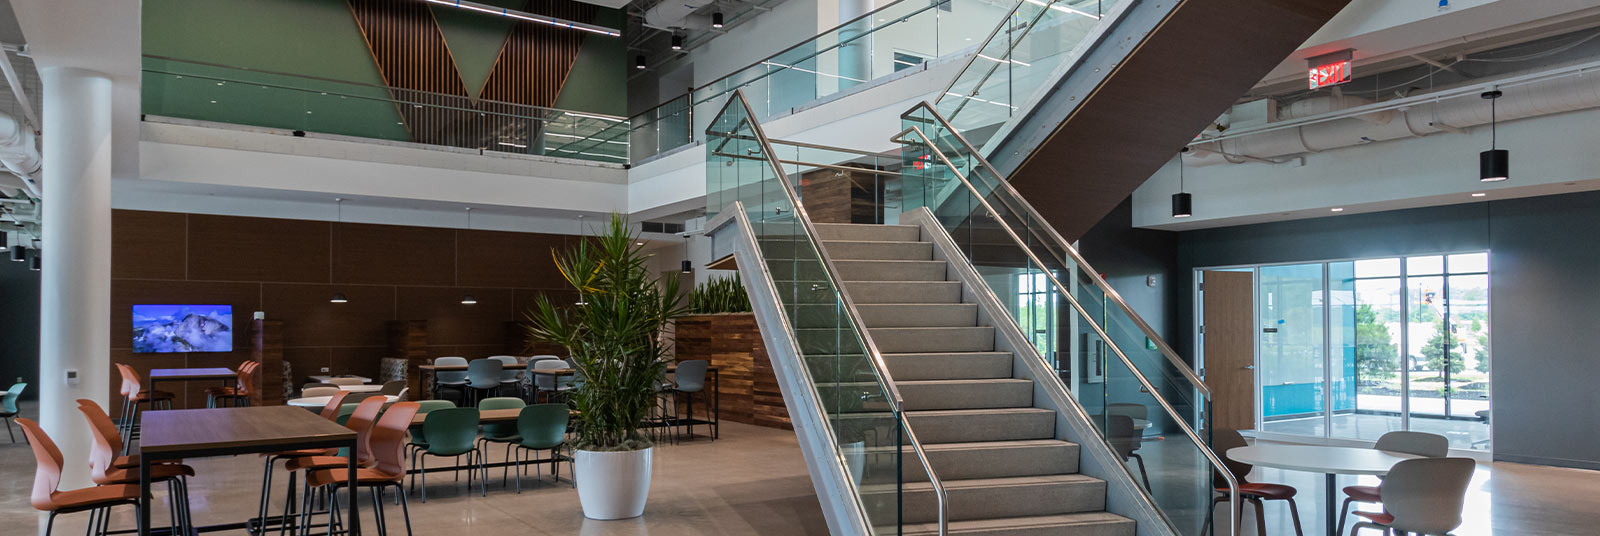 Monumental staircase at the new VEGA Americas headquarters.